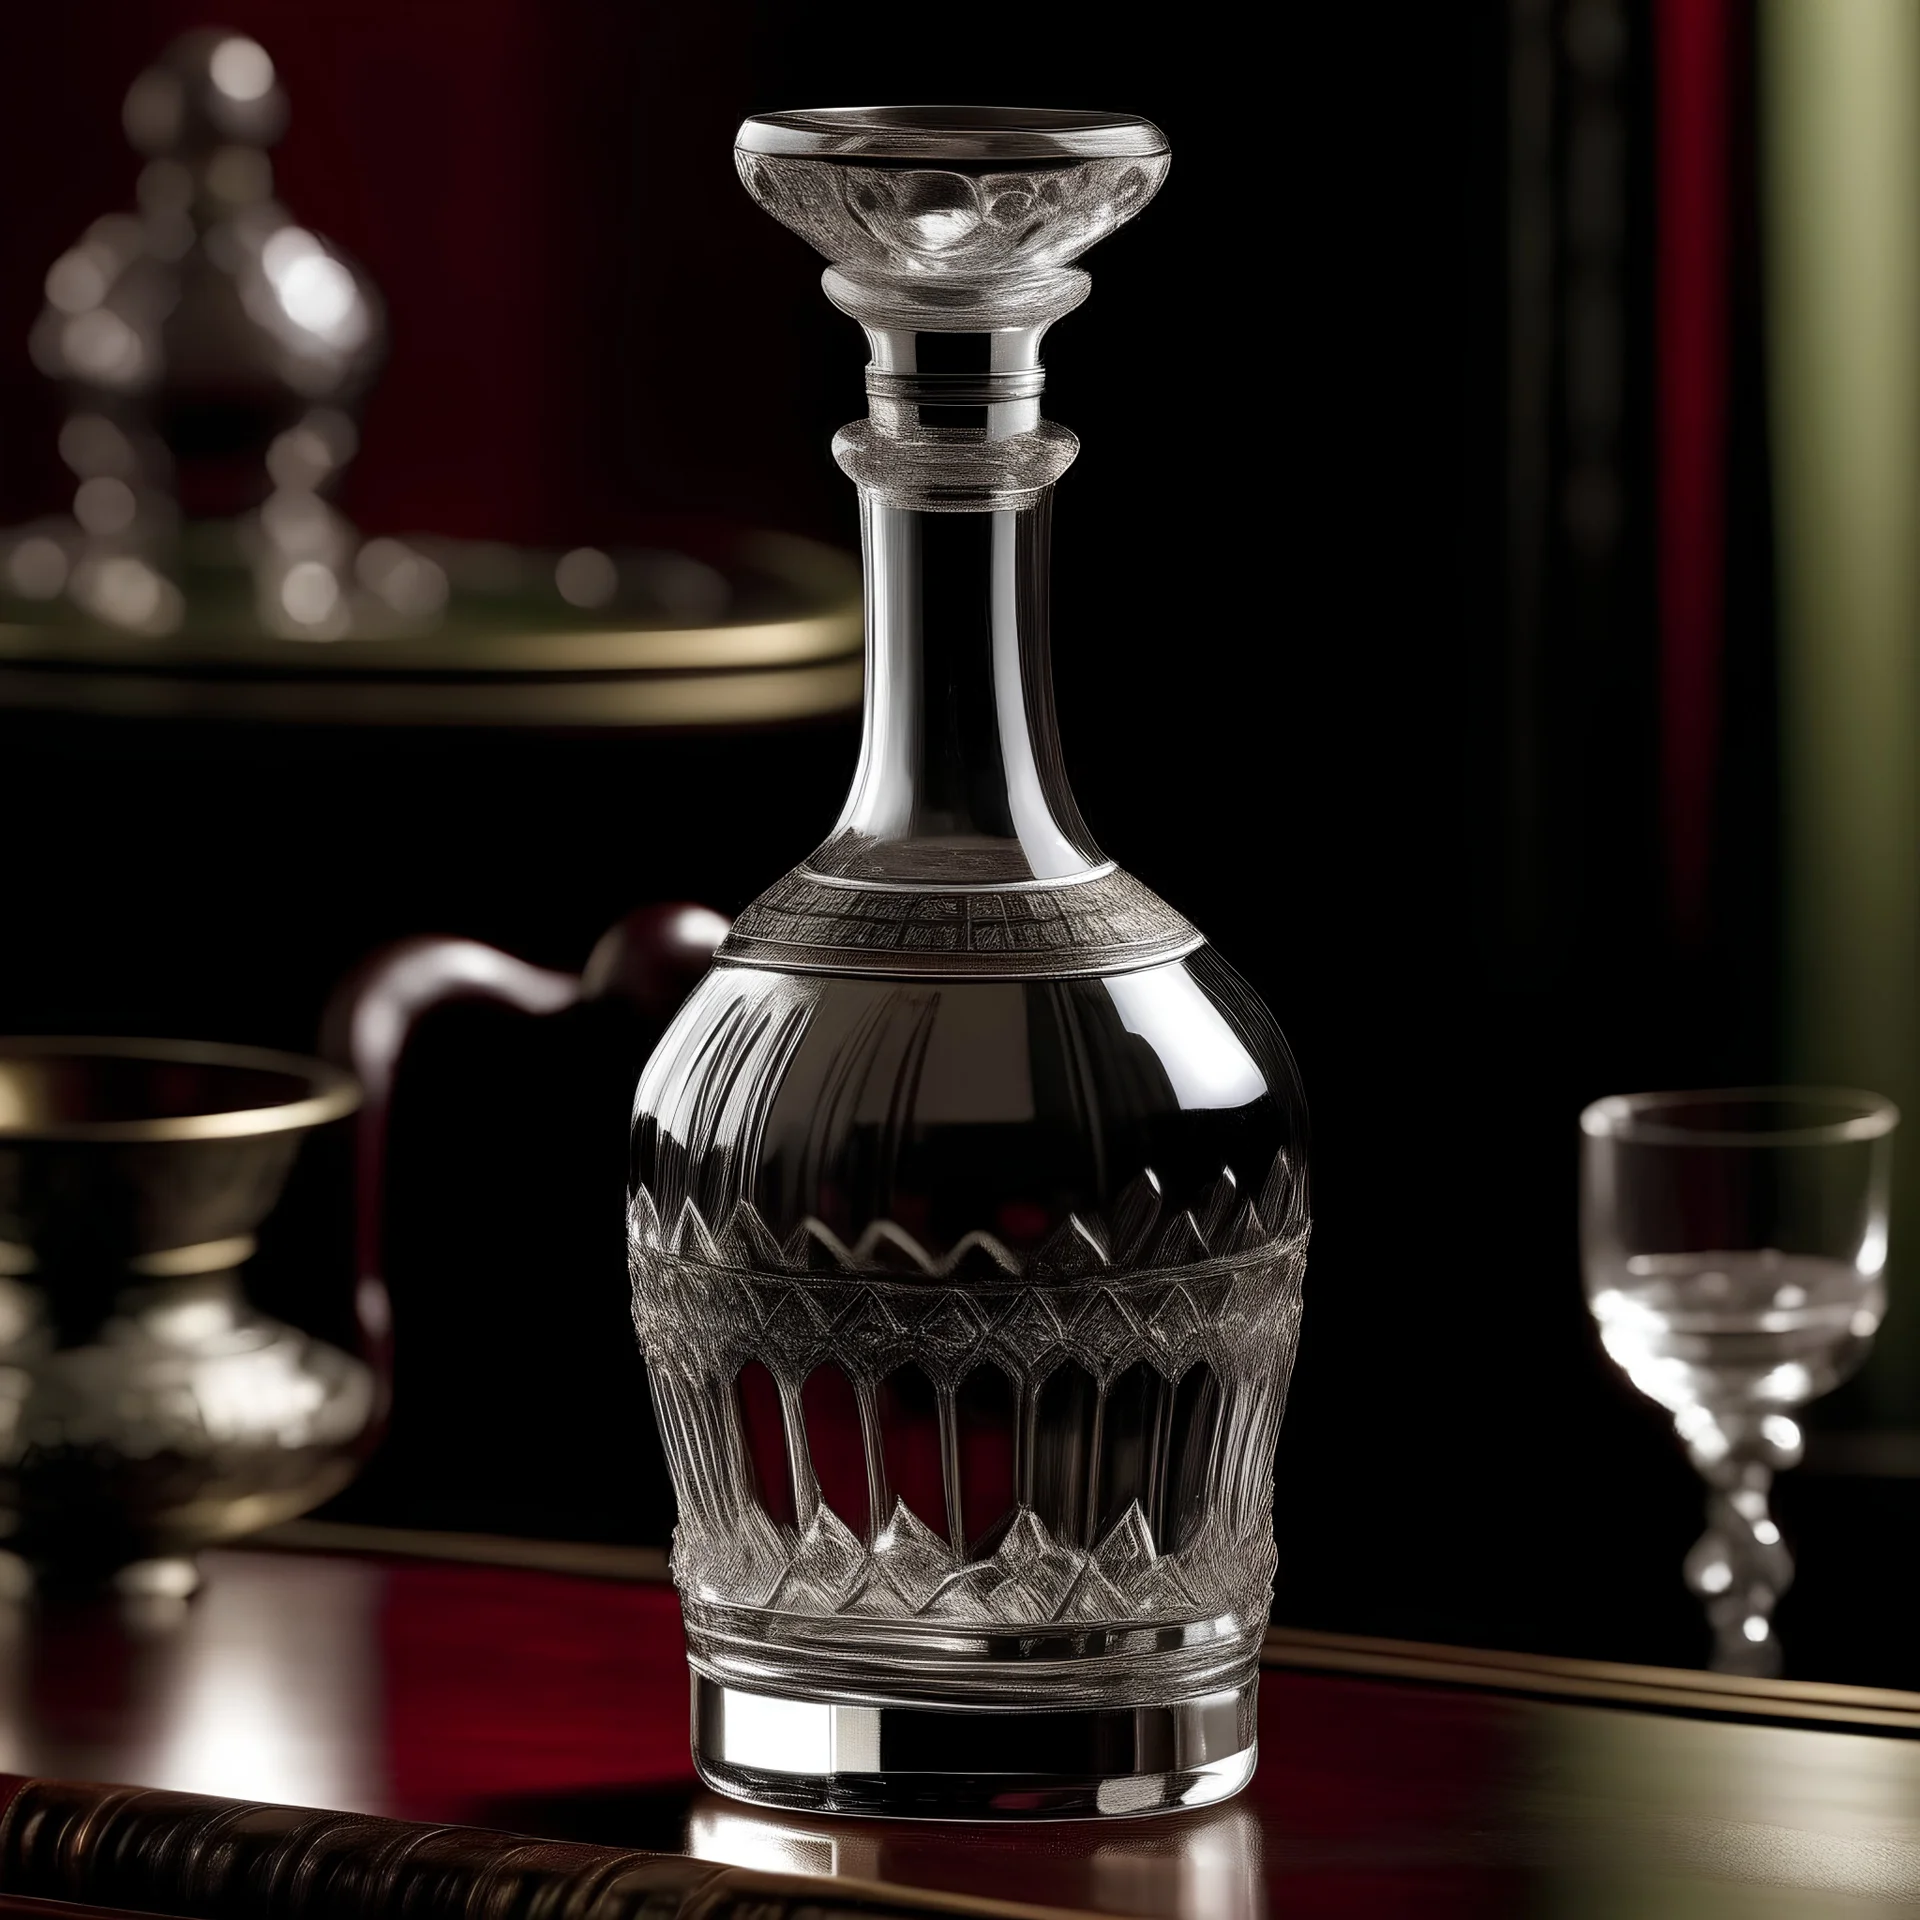 Design an antique-style decanter with a long, slender neck and intricate crystal patterns. The decanter should be filled with a bright red liquid, evoking the richness of fine wine. Capture the elegance and luxury of a bygone era in the artwork.